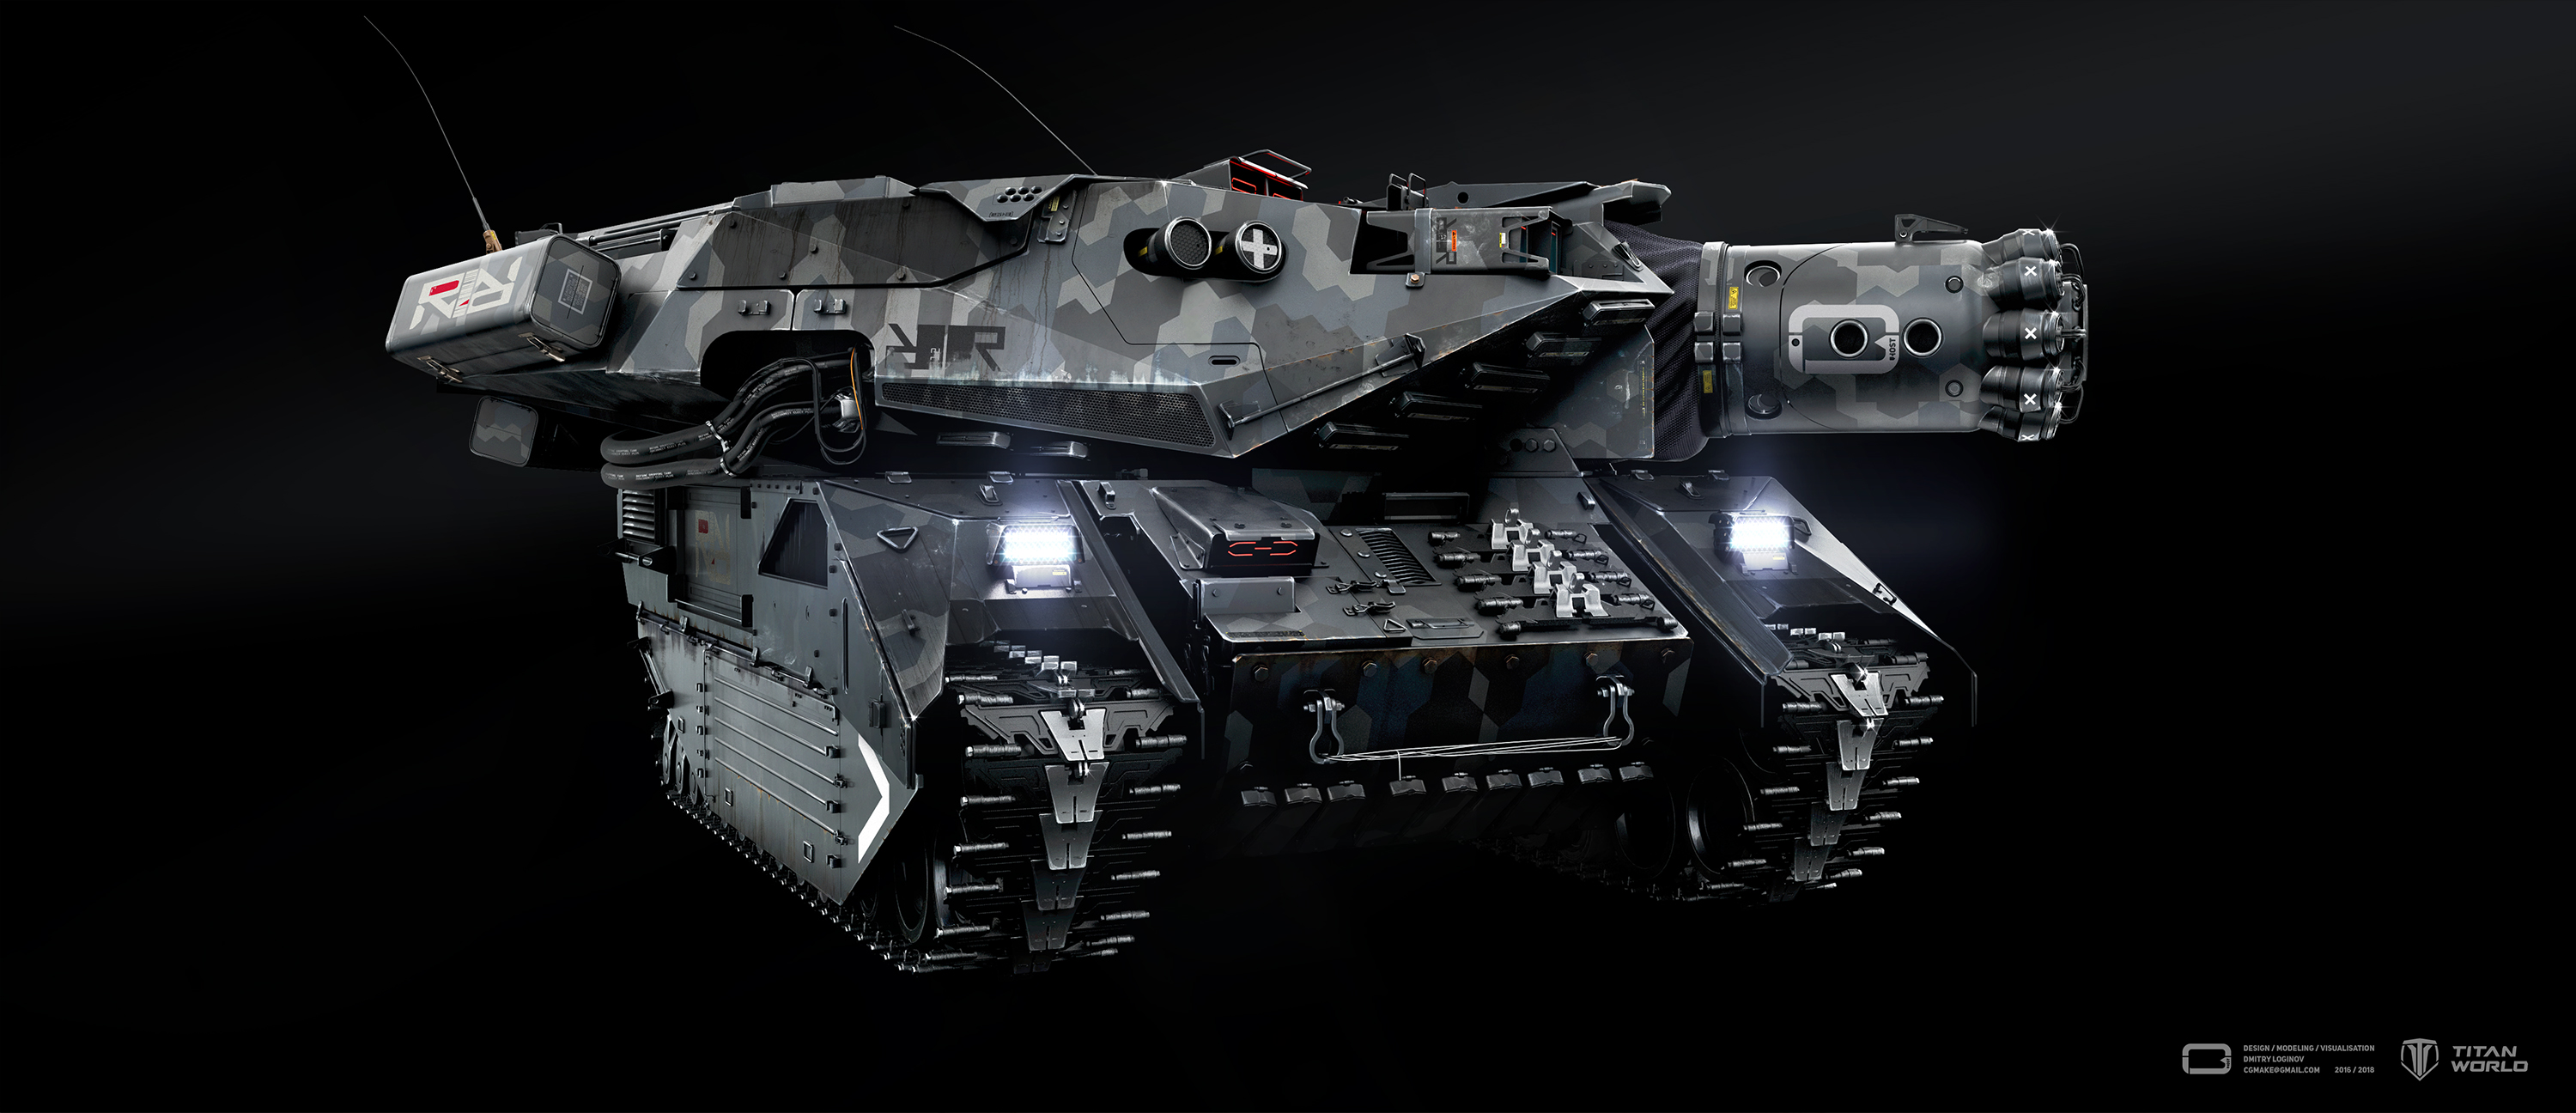 SIEGE TANK in 3d max vray 3.0 image